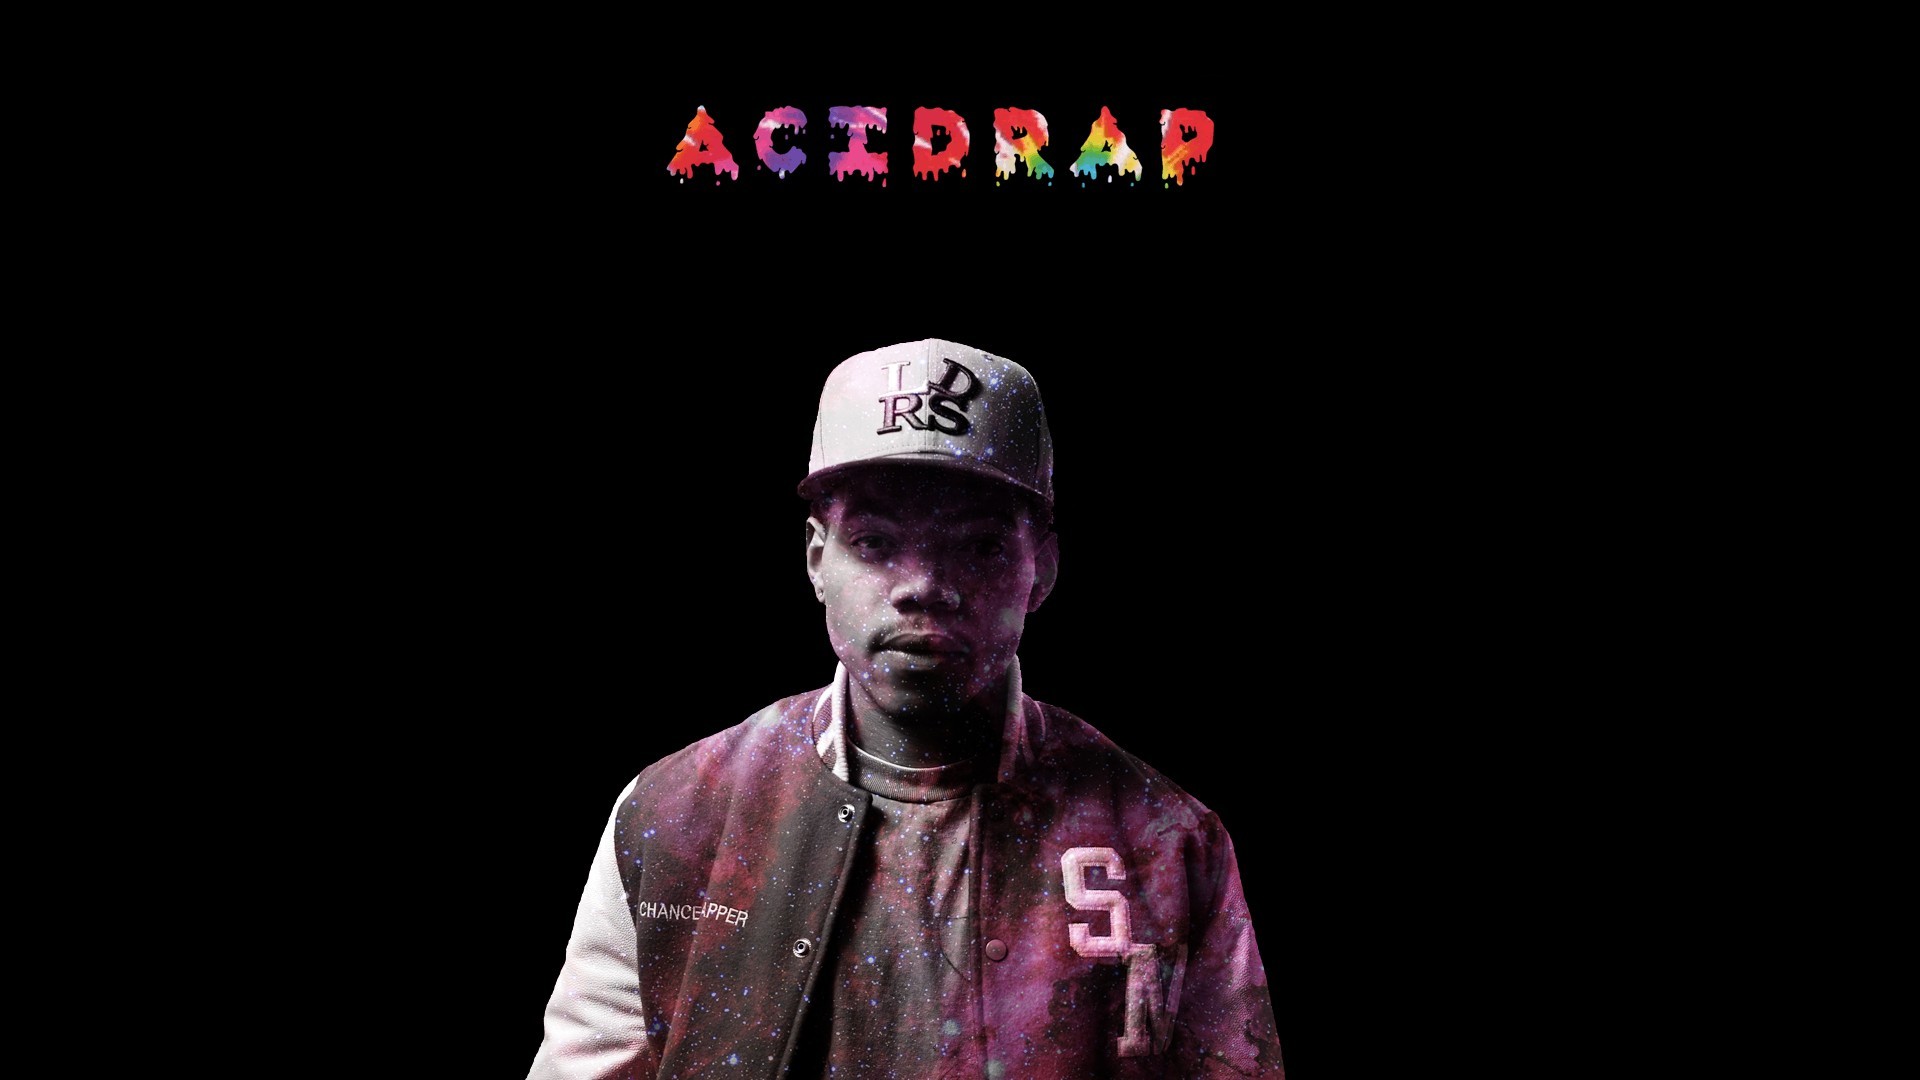 1920x1080  large chance the rapper wallpaper 